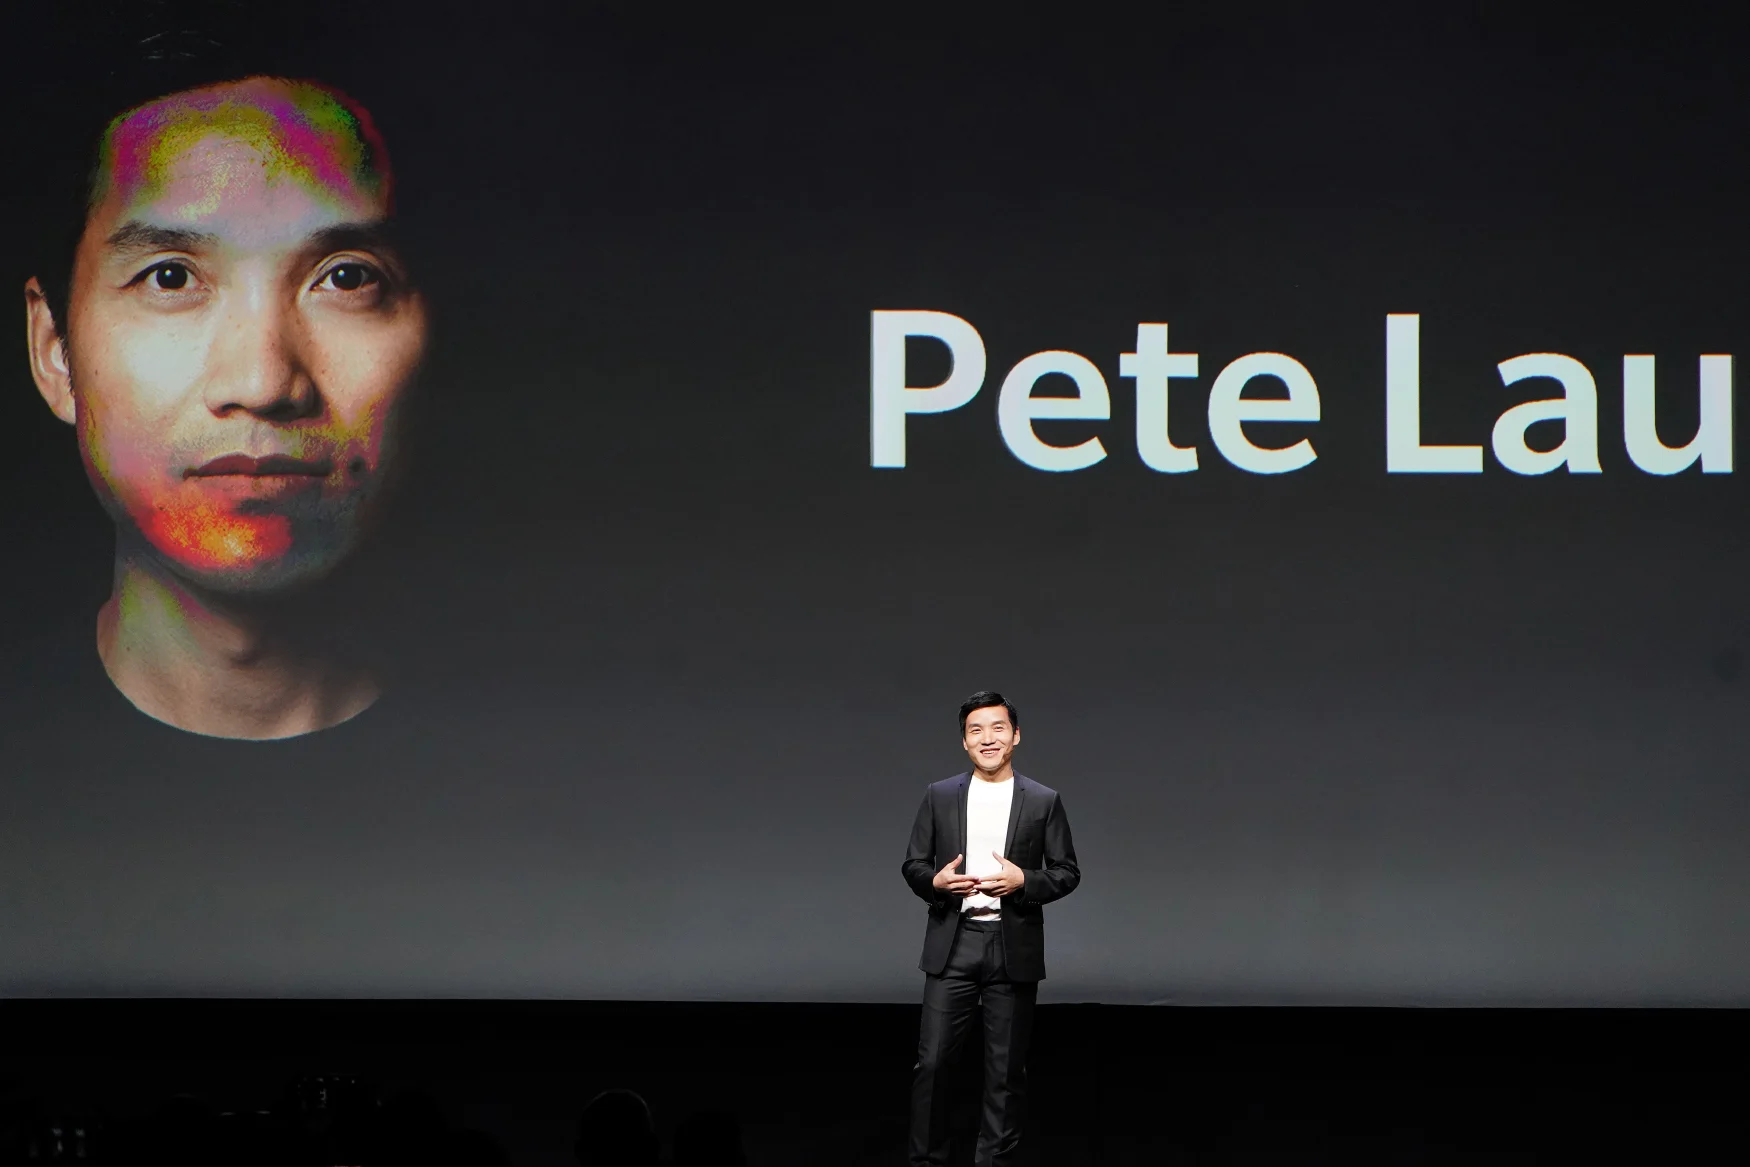 Chief Executive Officer of OnePlus Pete Lau attends a launch event for the new OnePlus 6T in the Manhattan borough of New York, New York, U.S., October 29, 2018. REUTERS/Carlo Allegri